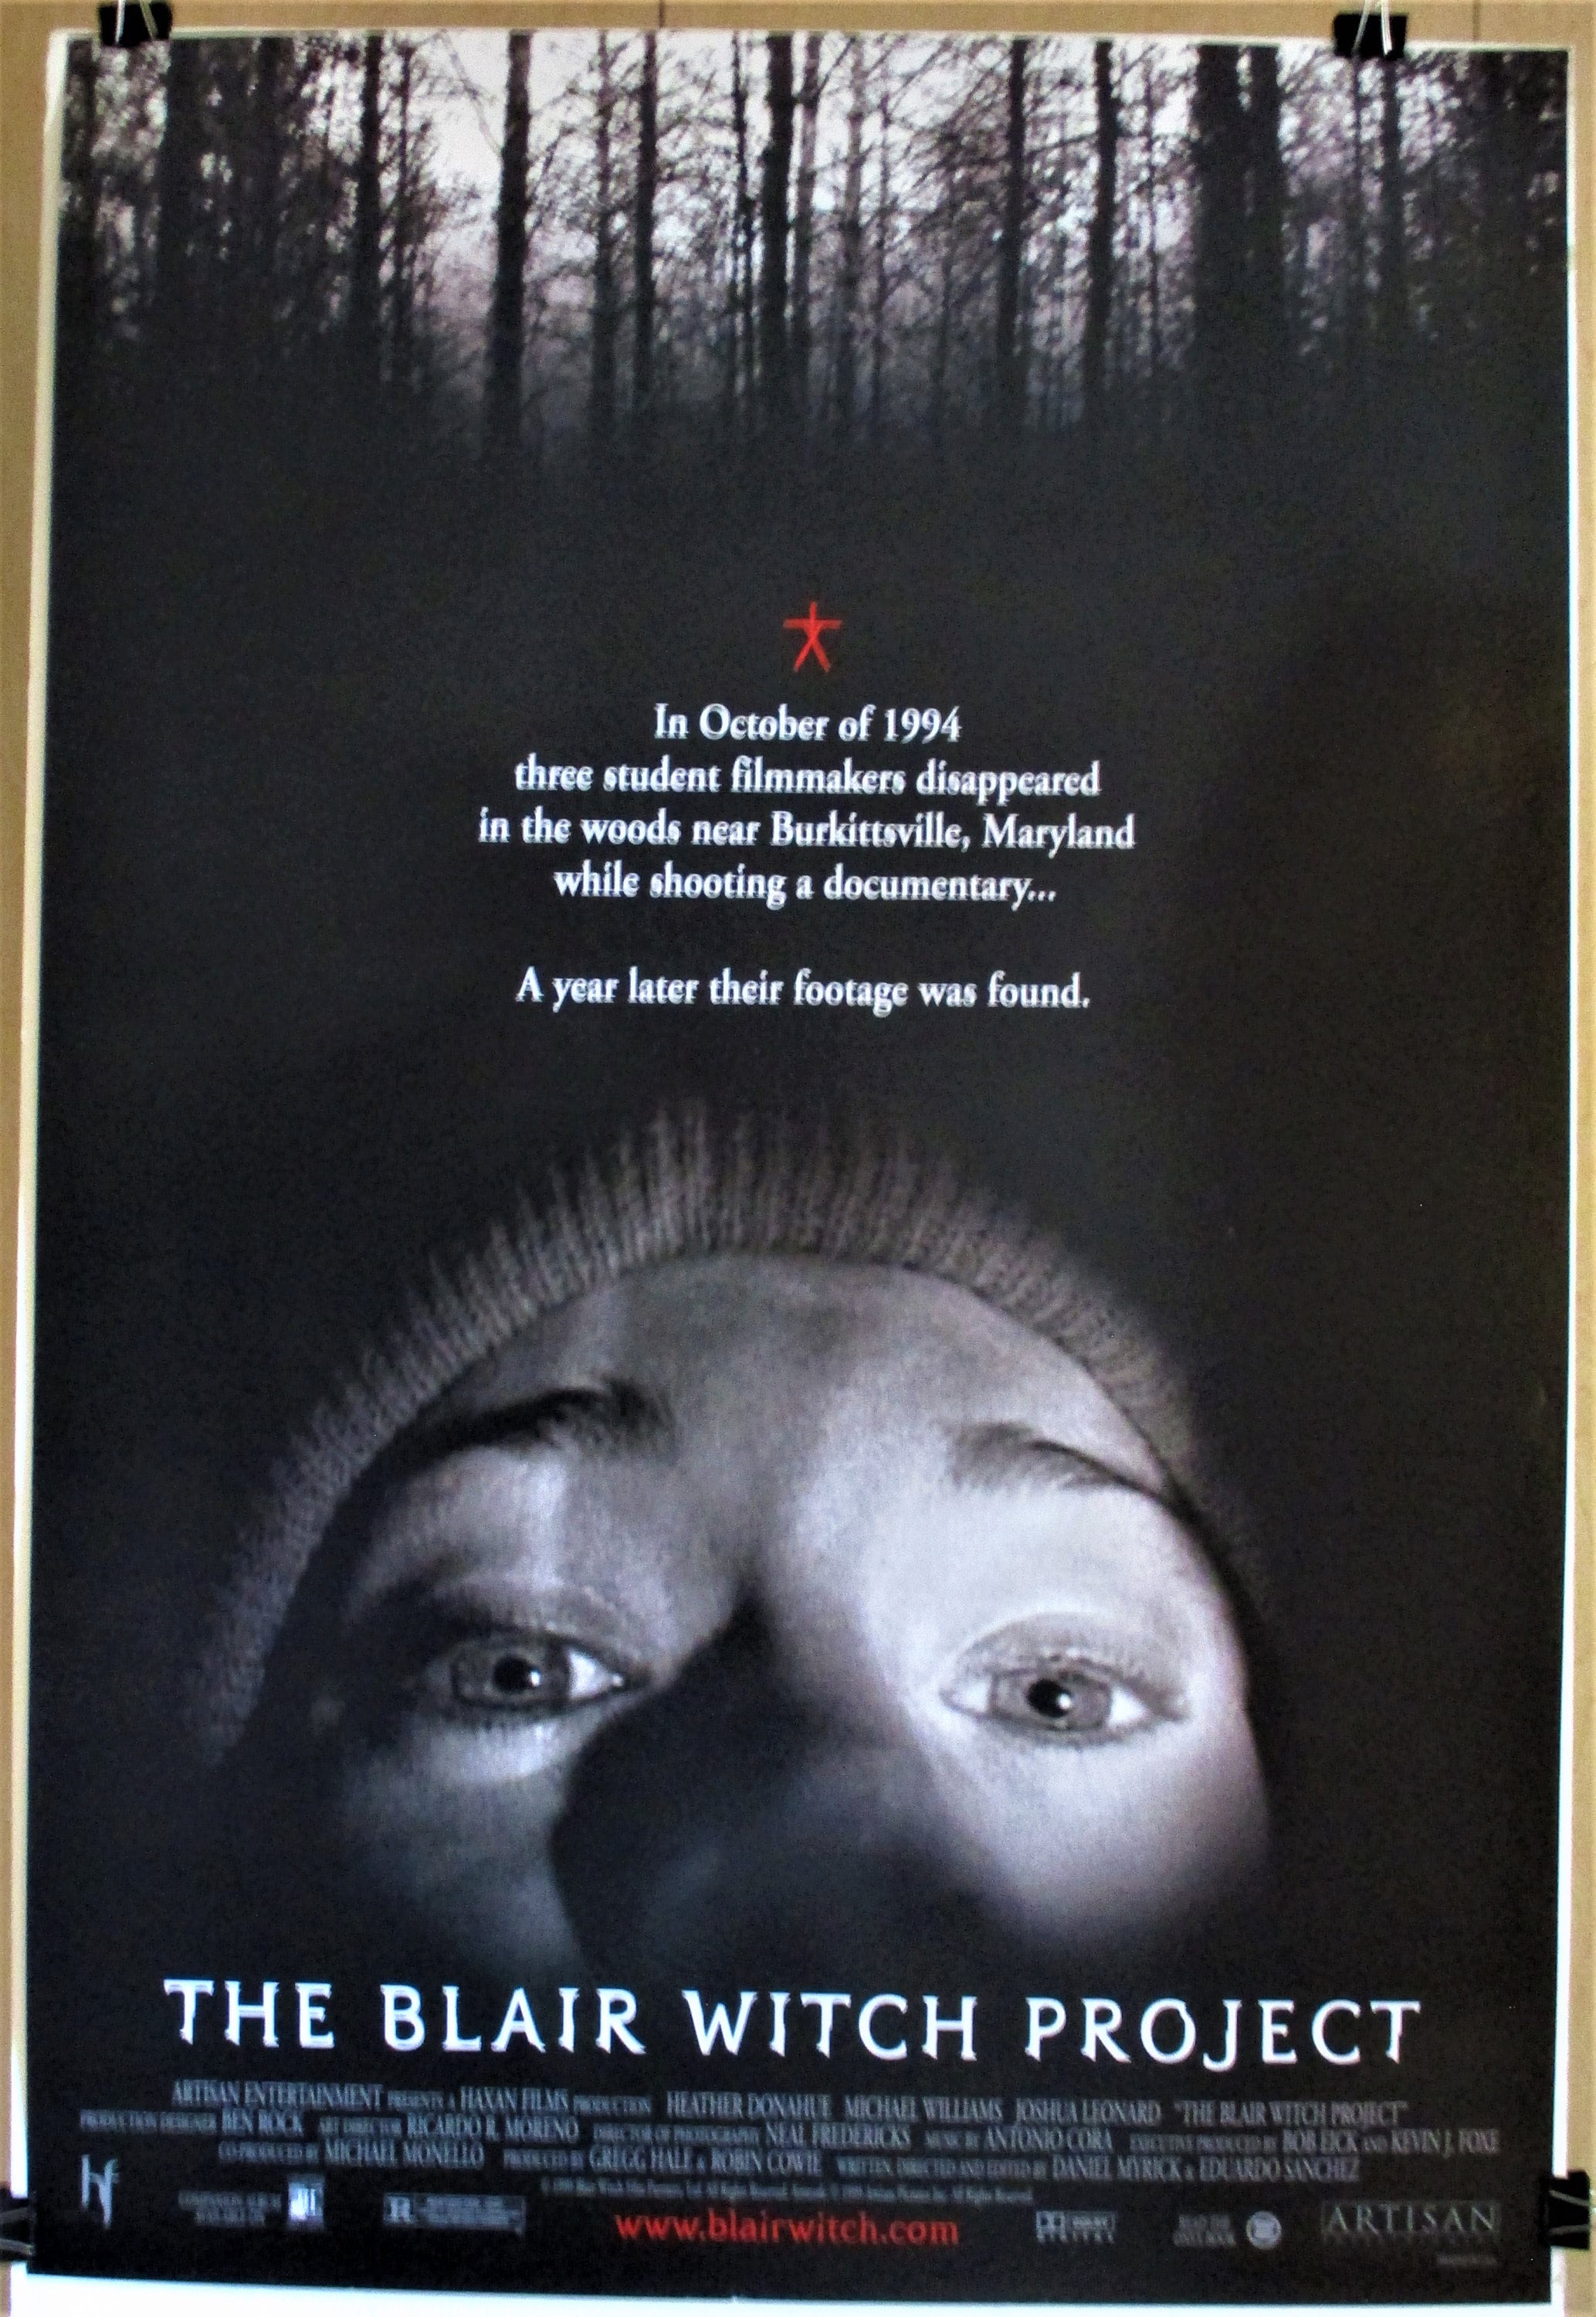 BLAIR WITCH PROJECT 1999 Original 27 X 40 Movie Poster | Etsy